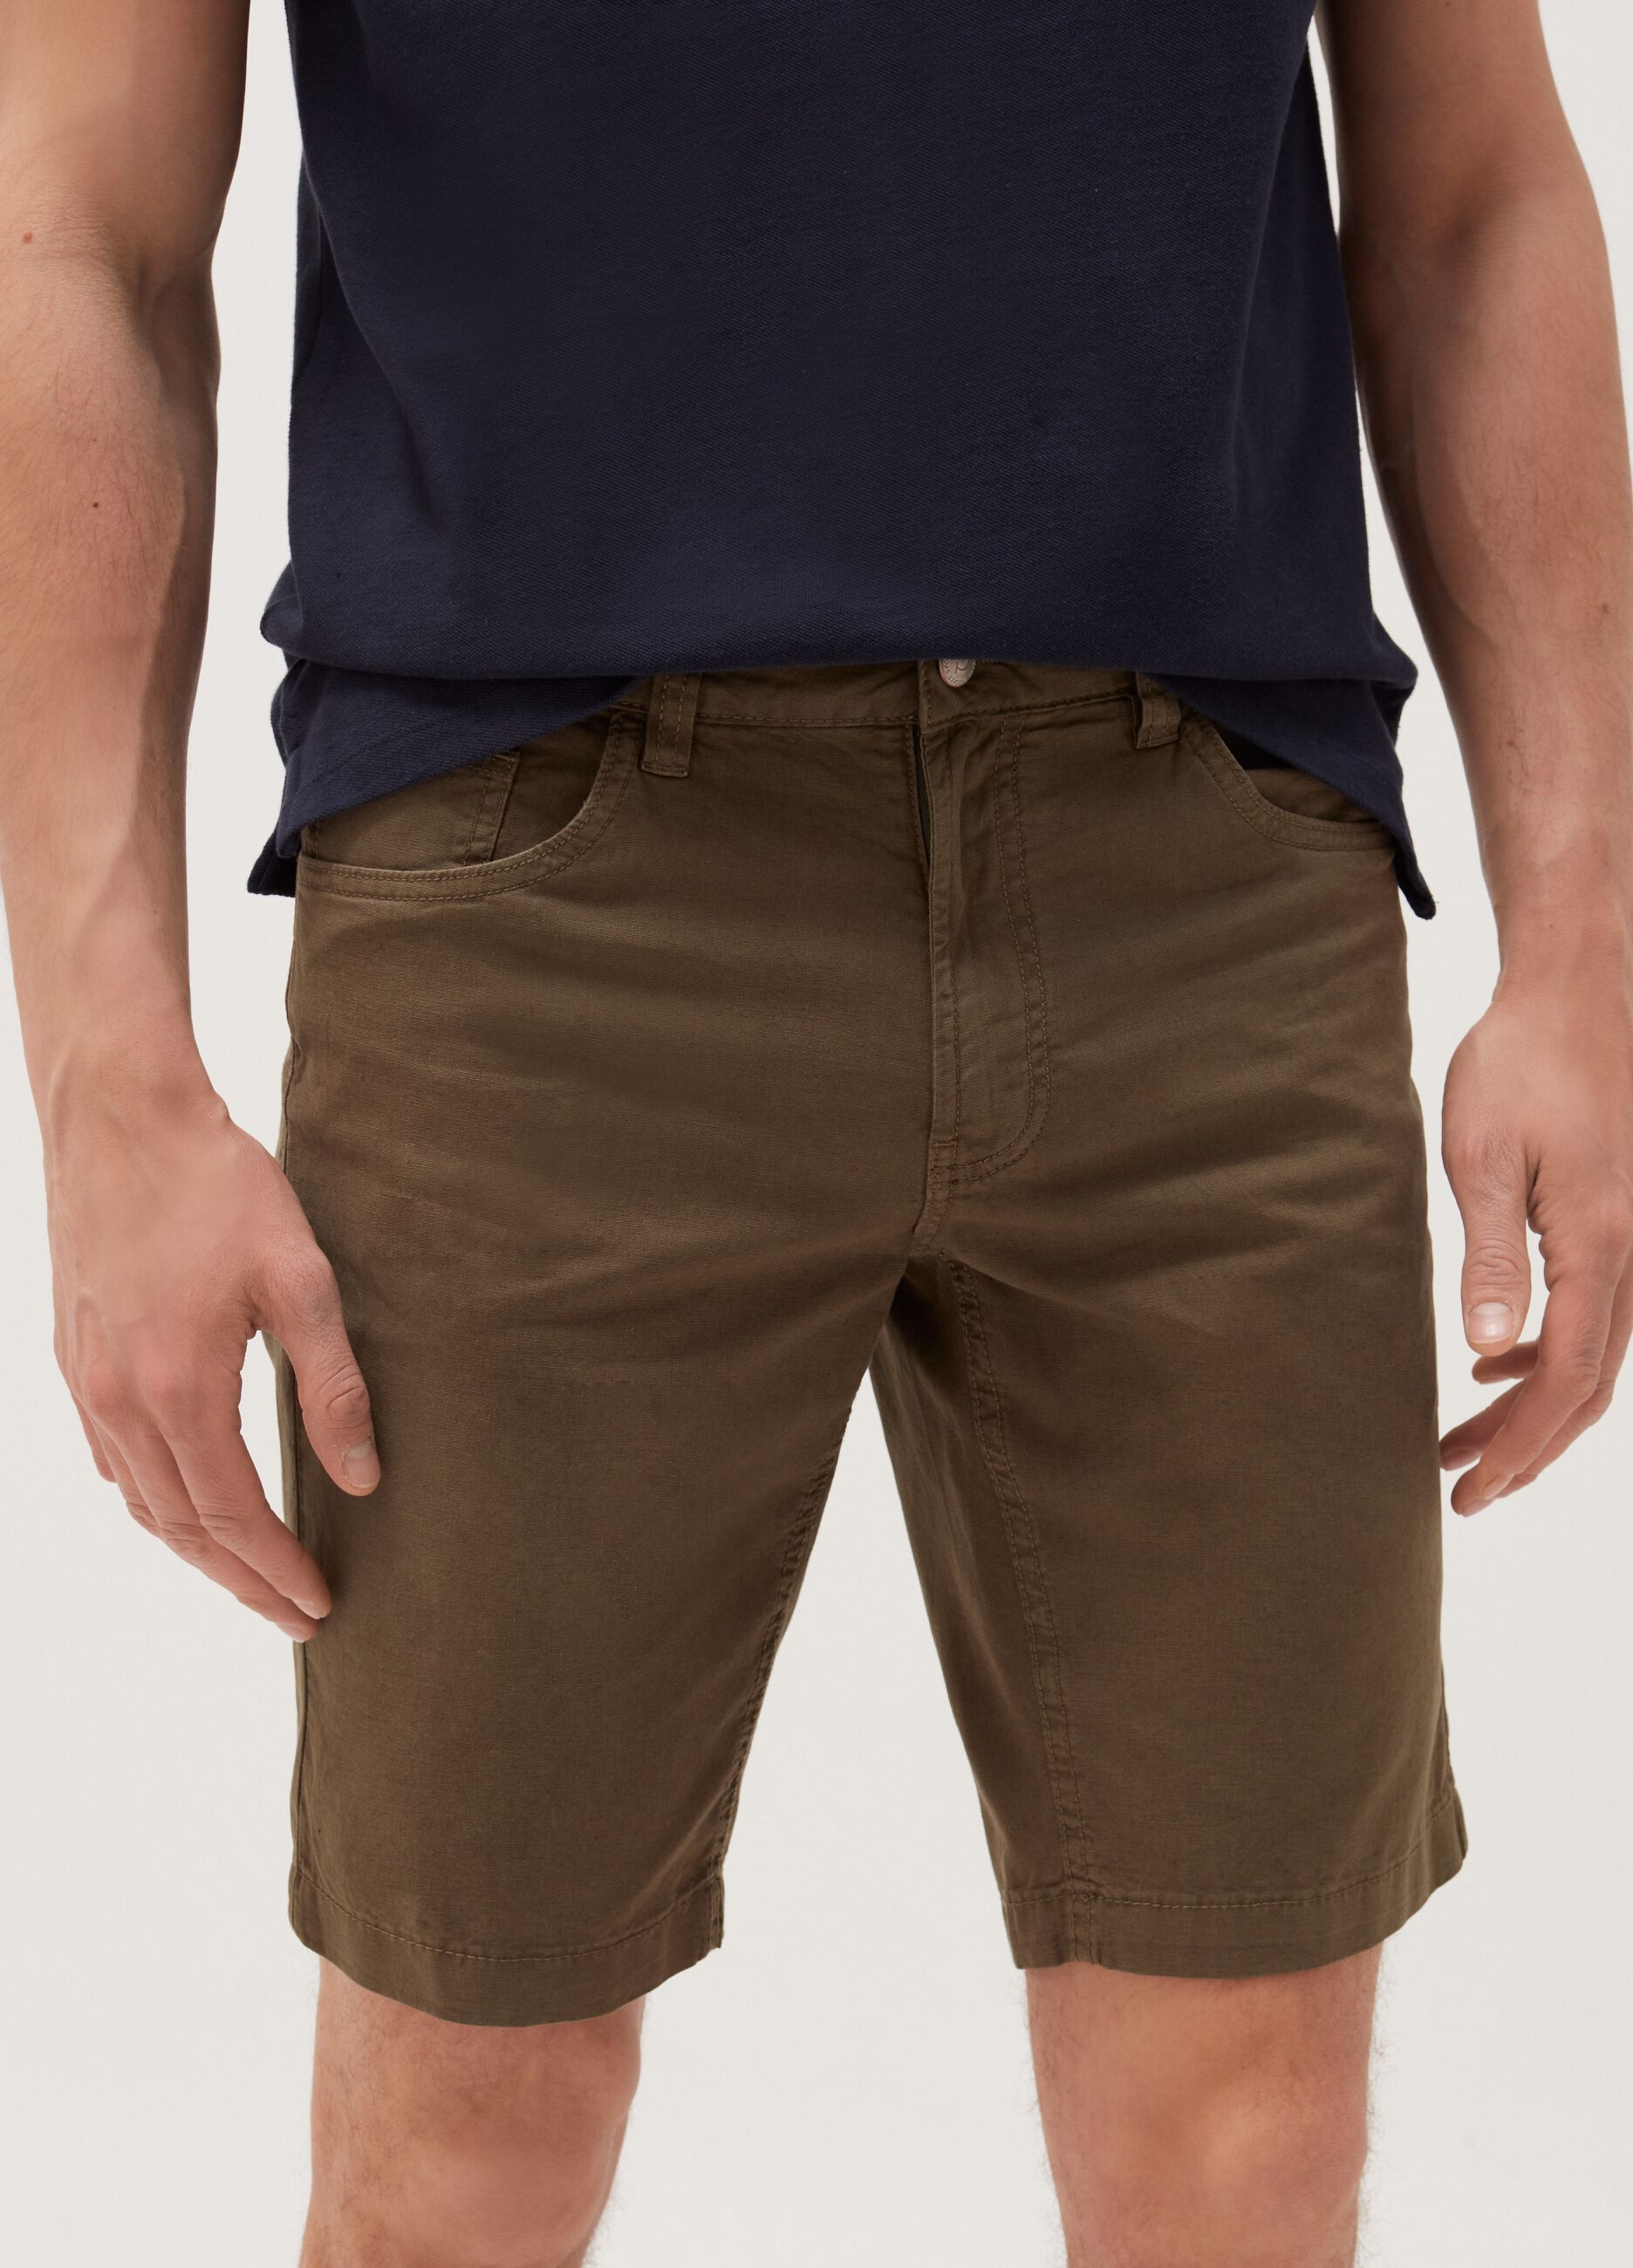 Bermuda shorts with five pockets in linen and cotton